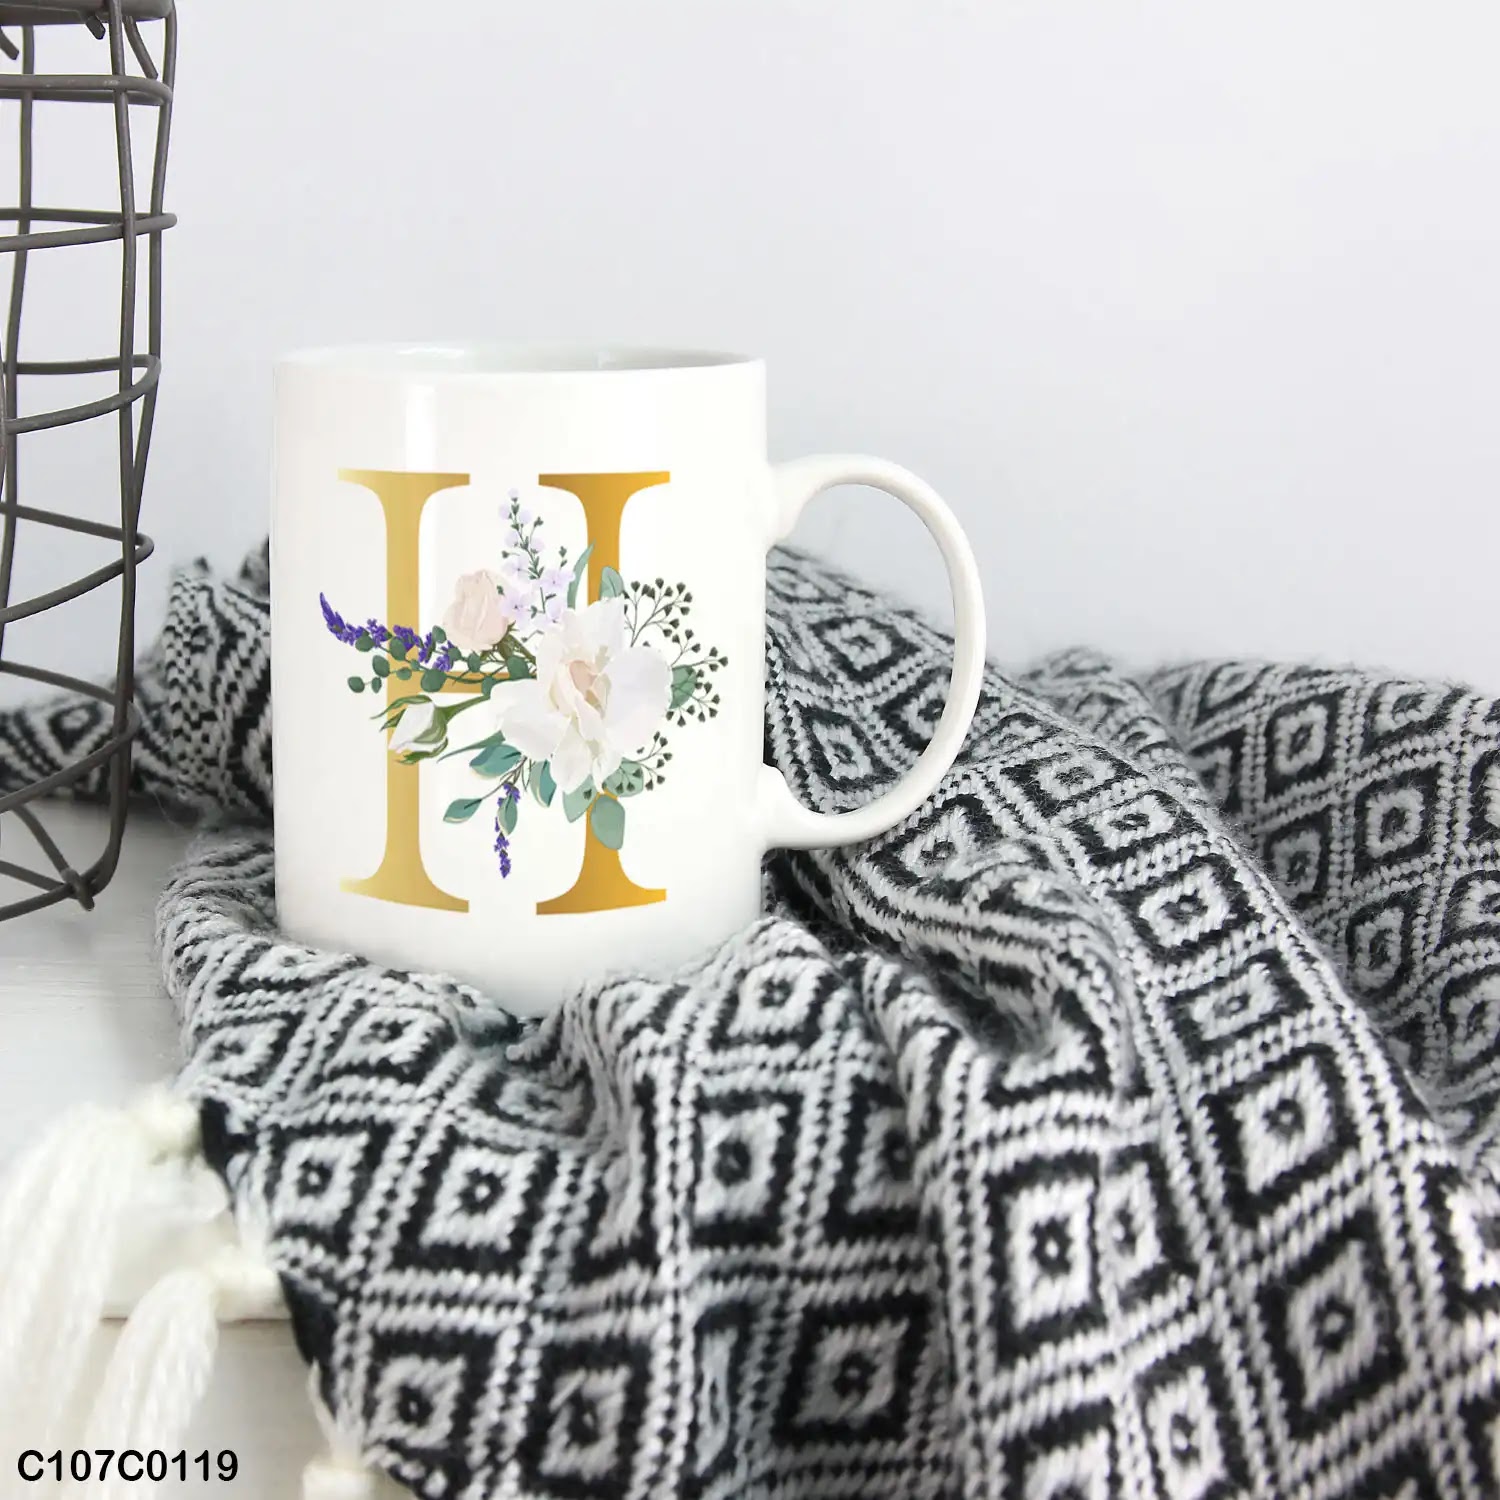 A white mug (cup) printed with gold Letter "H" and small white branch